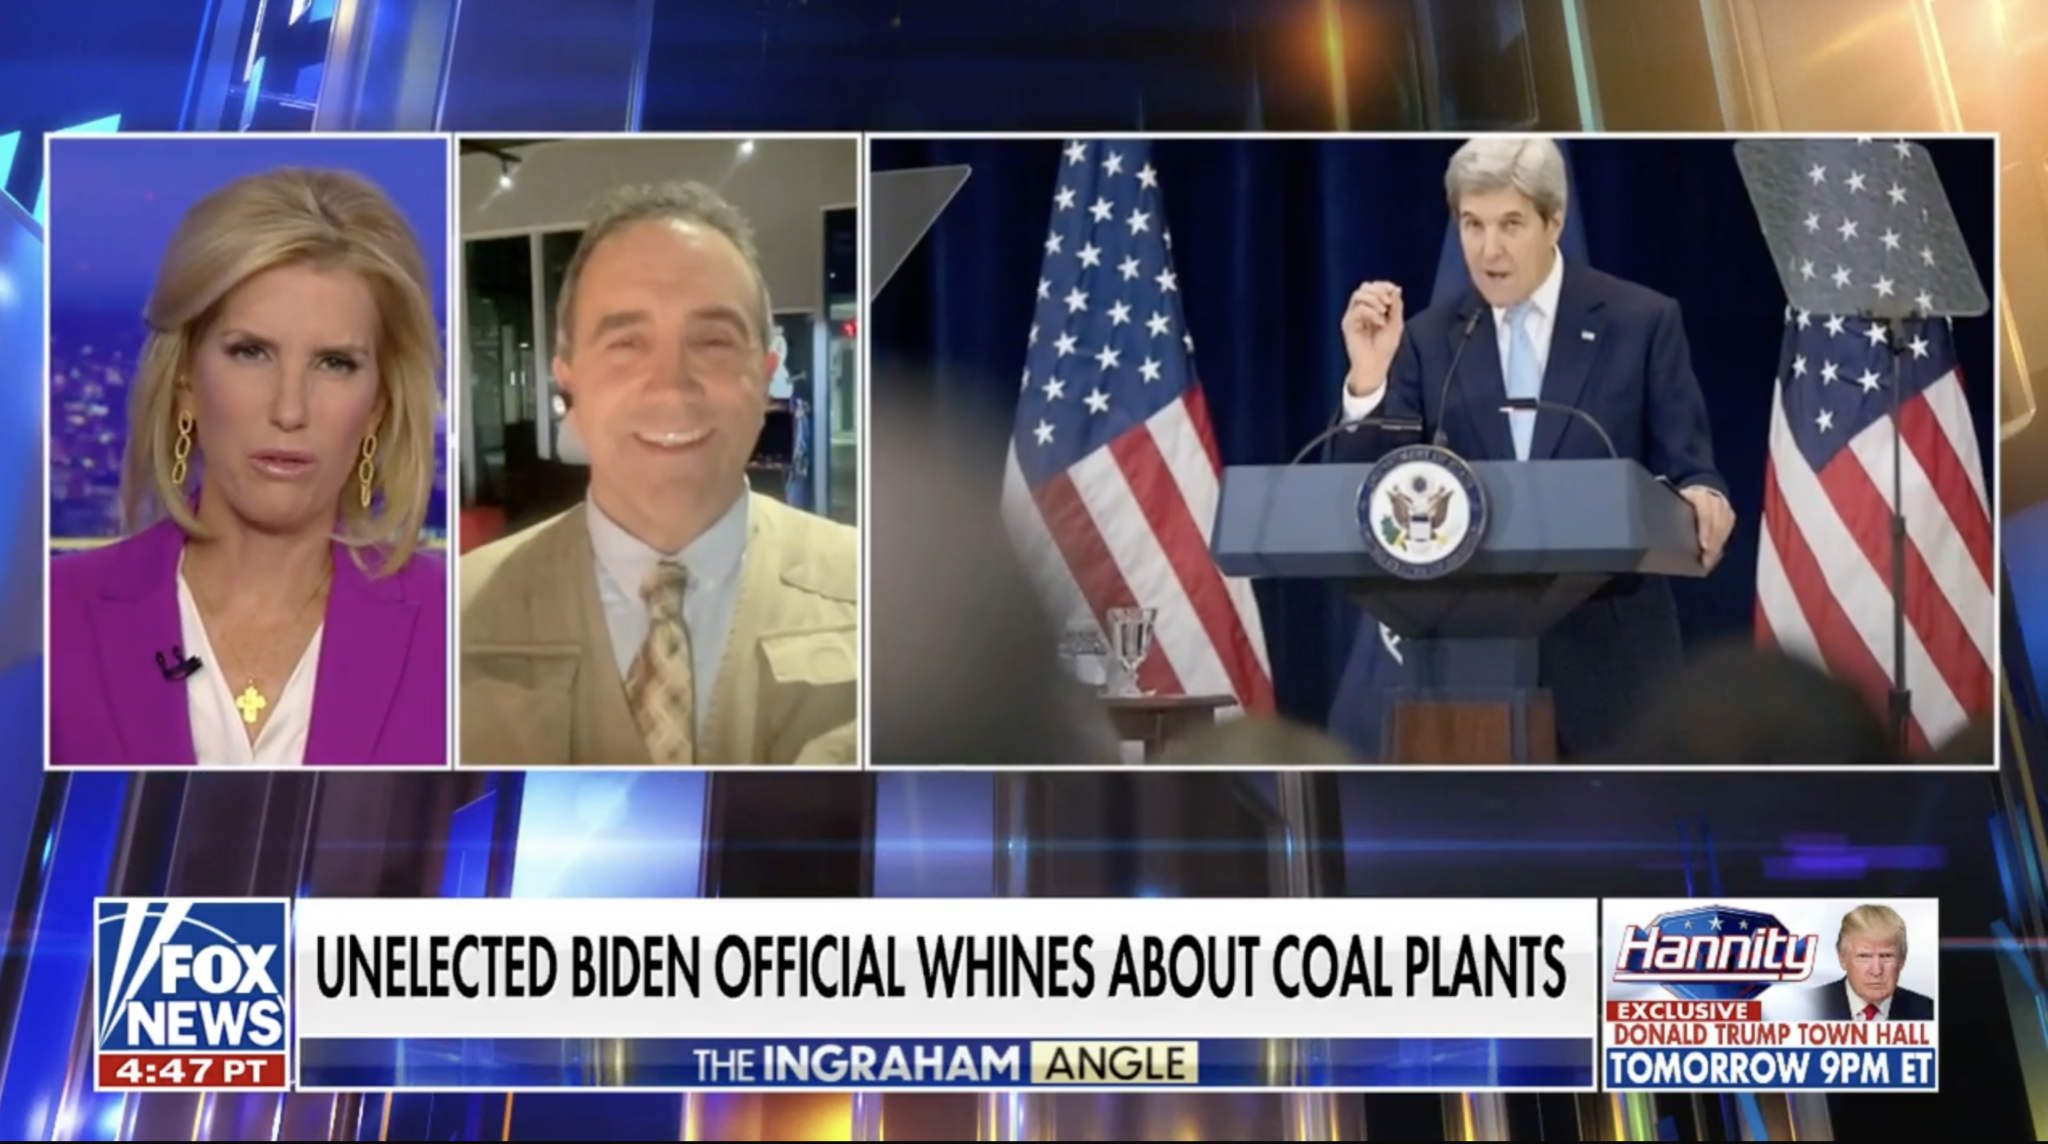 Morano on Fox: Unelected Kerry weakening America on coal as China gets a pass